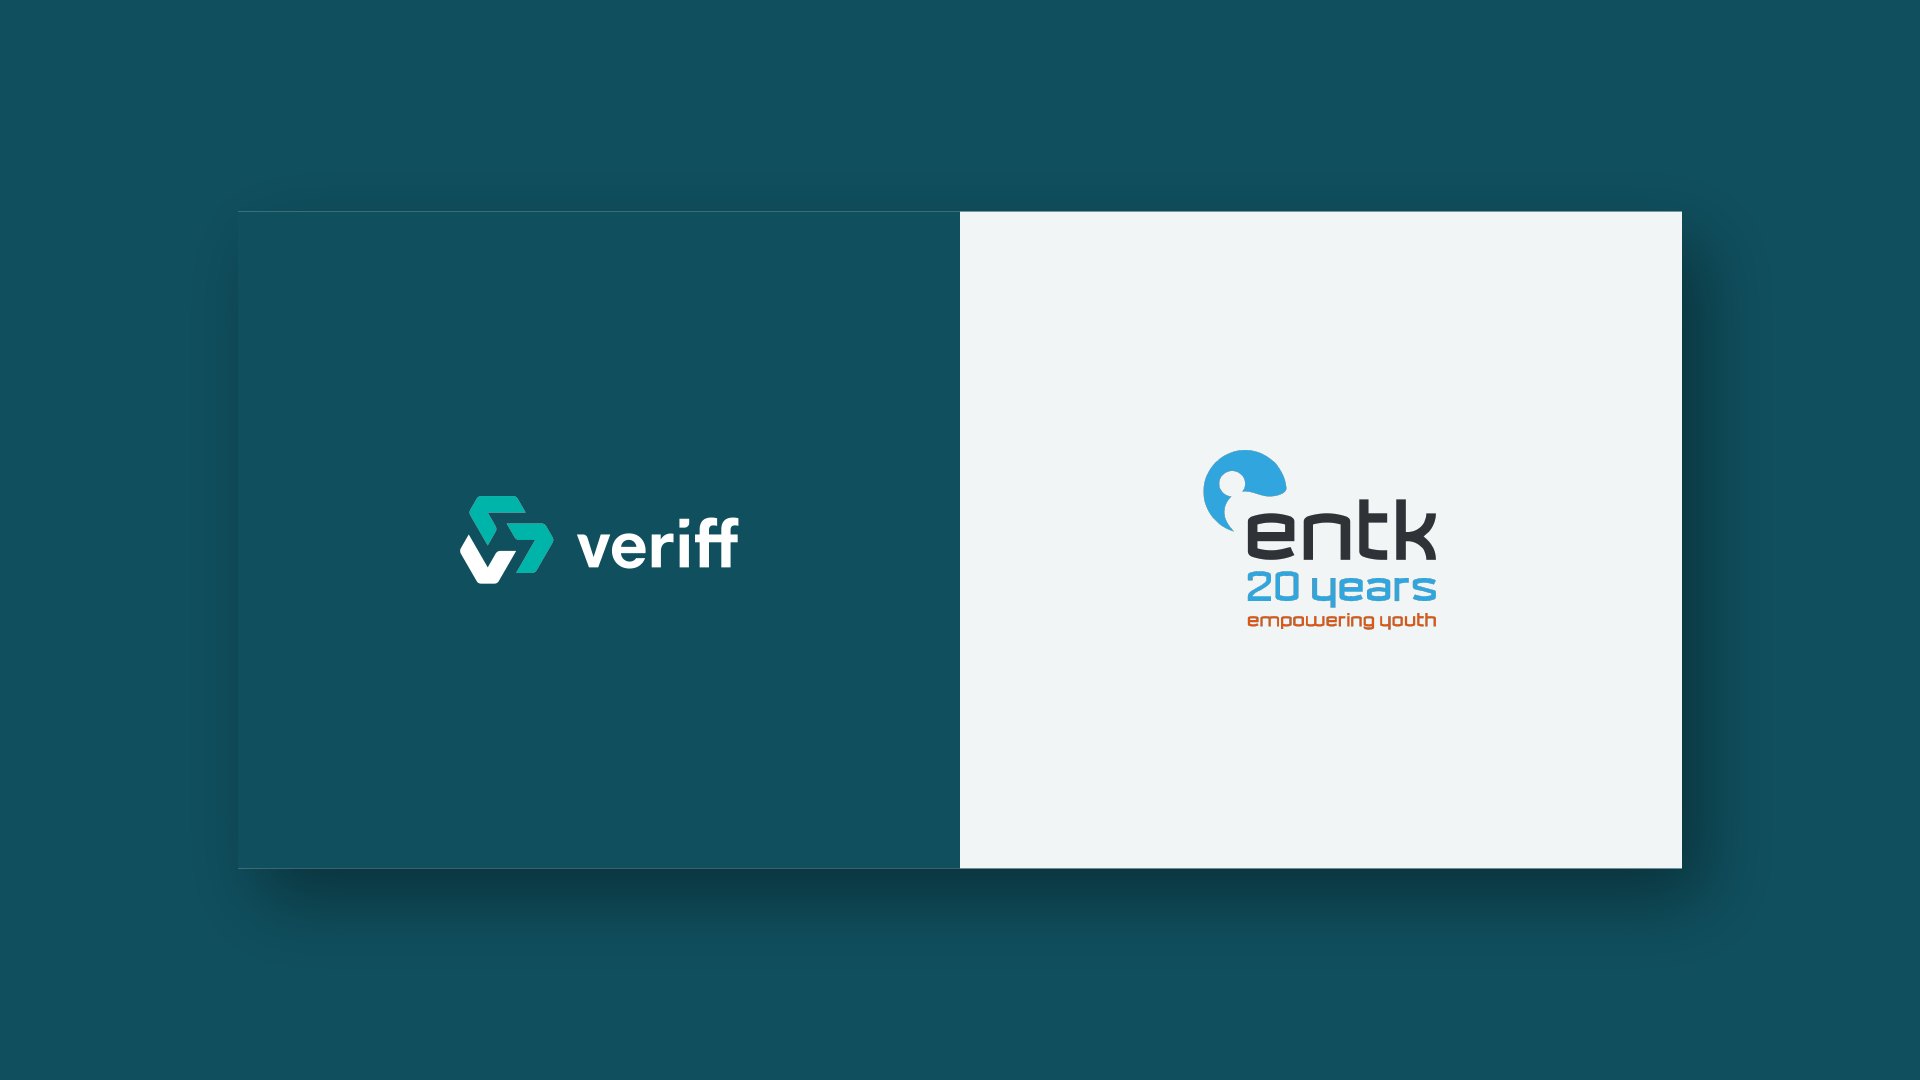 Veriff partners with the Estonian Youth Work Centre to provide free verifications